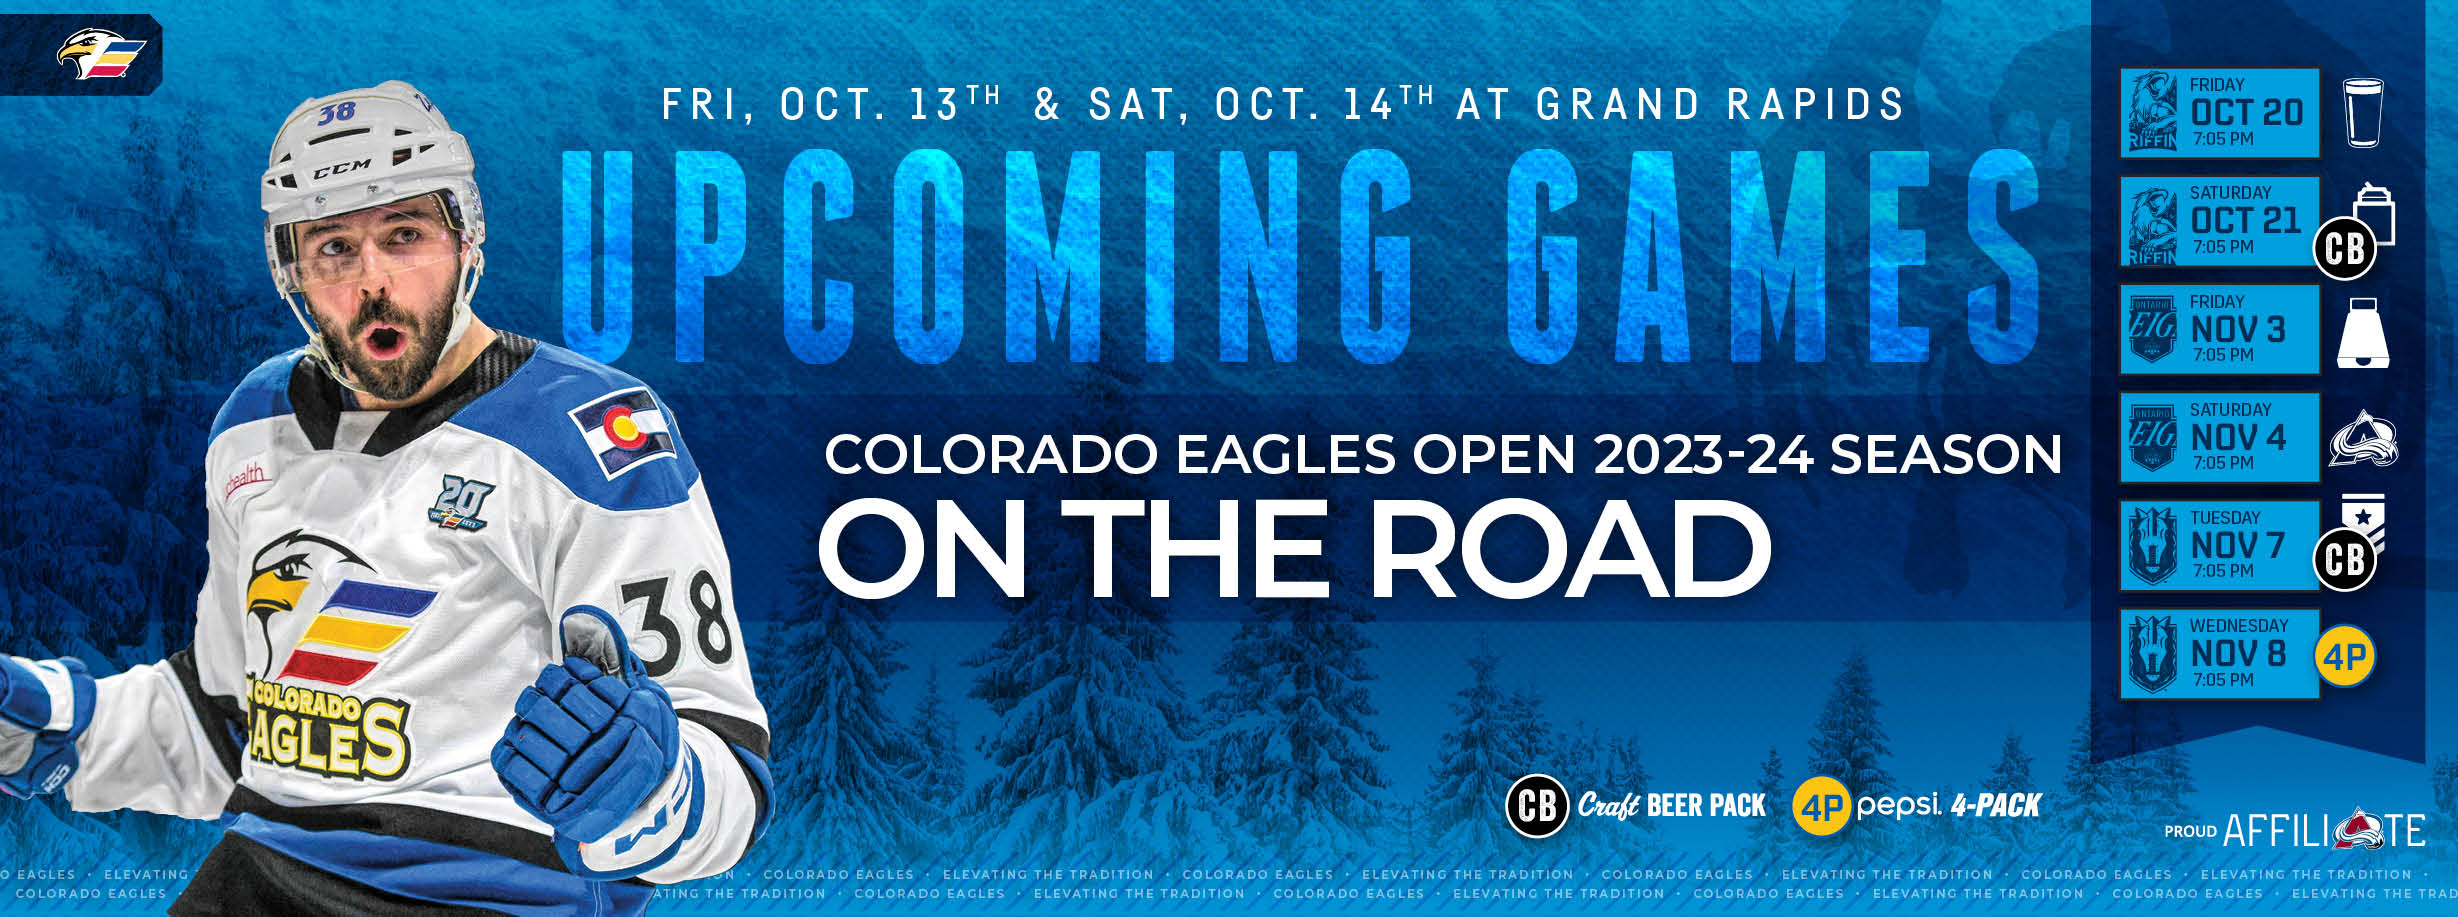 EAGLES TO OPEN ON THE ROAD FRIDAY, OCTOBER 13TH